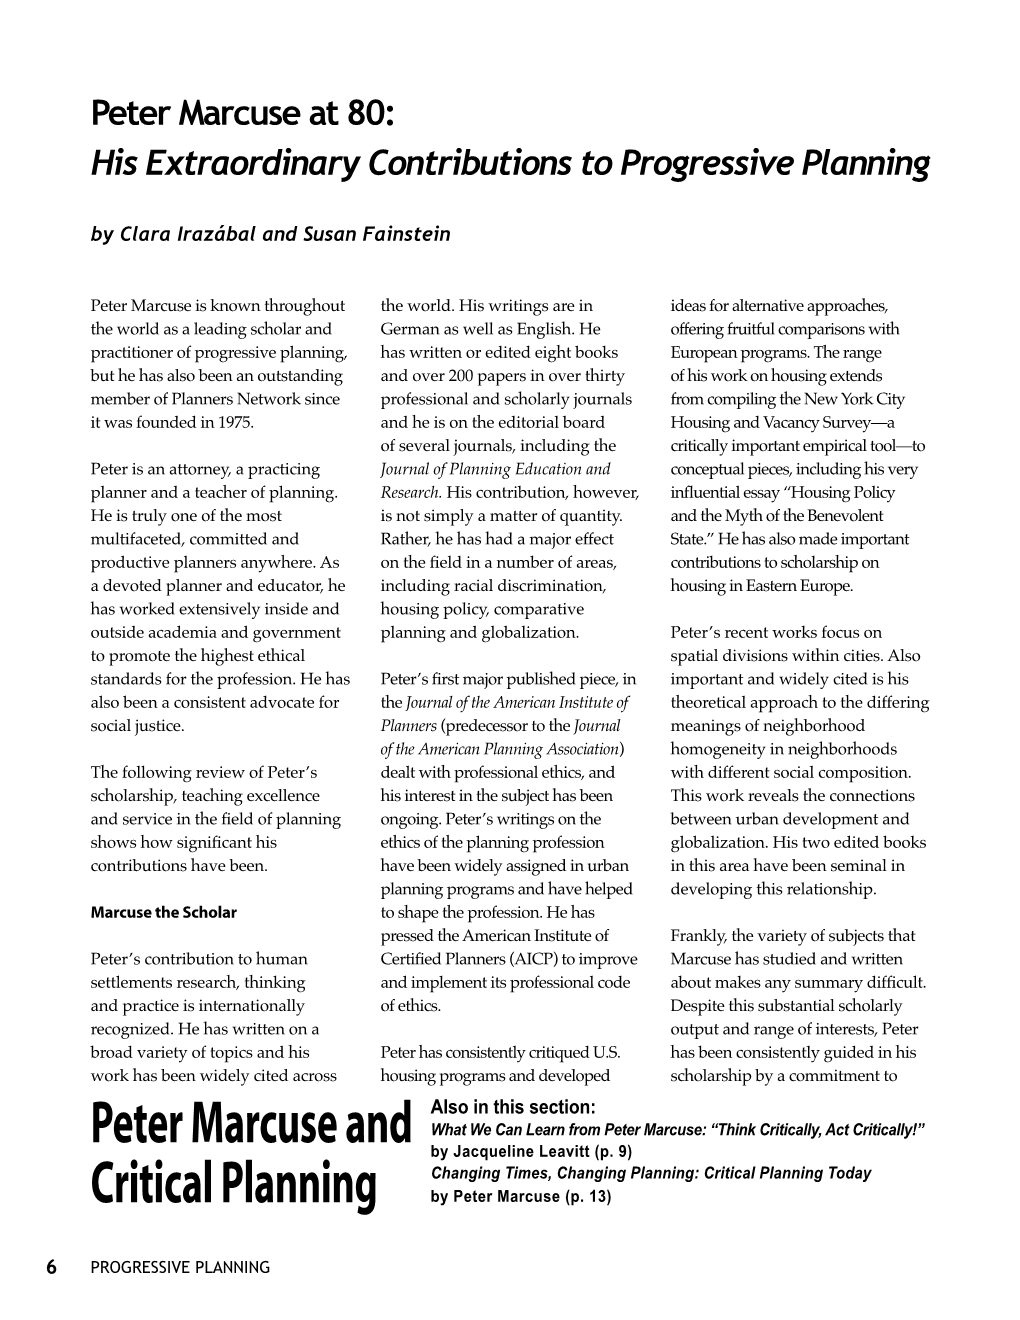 Peter Marcuse and Critical Planning